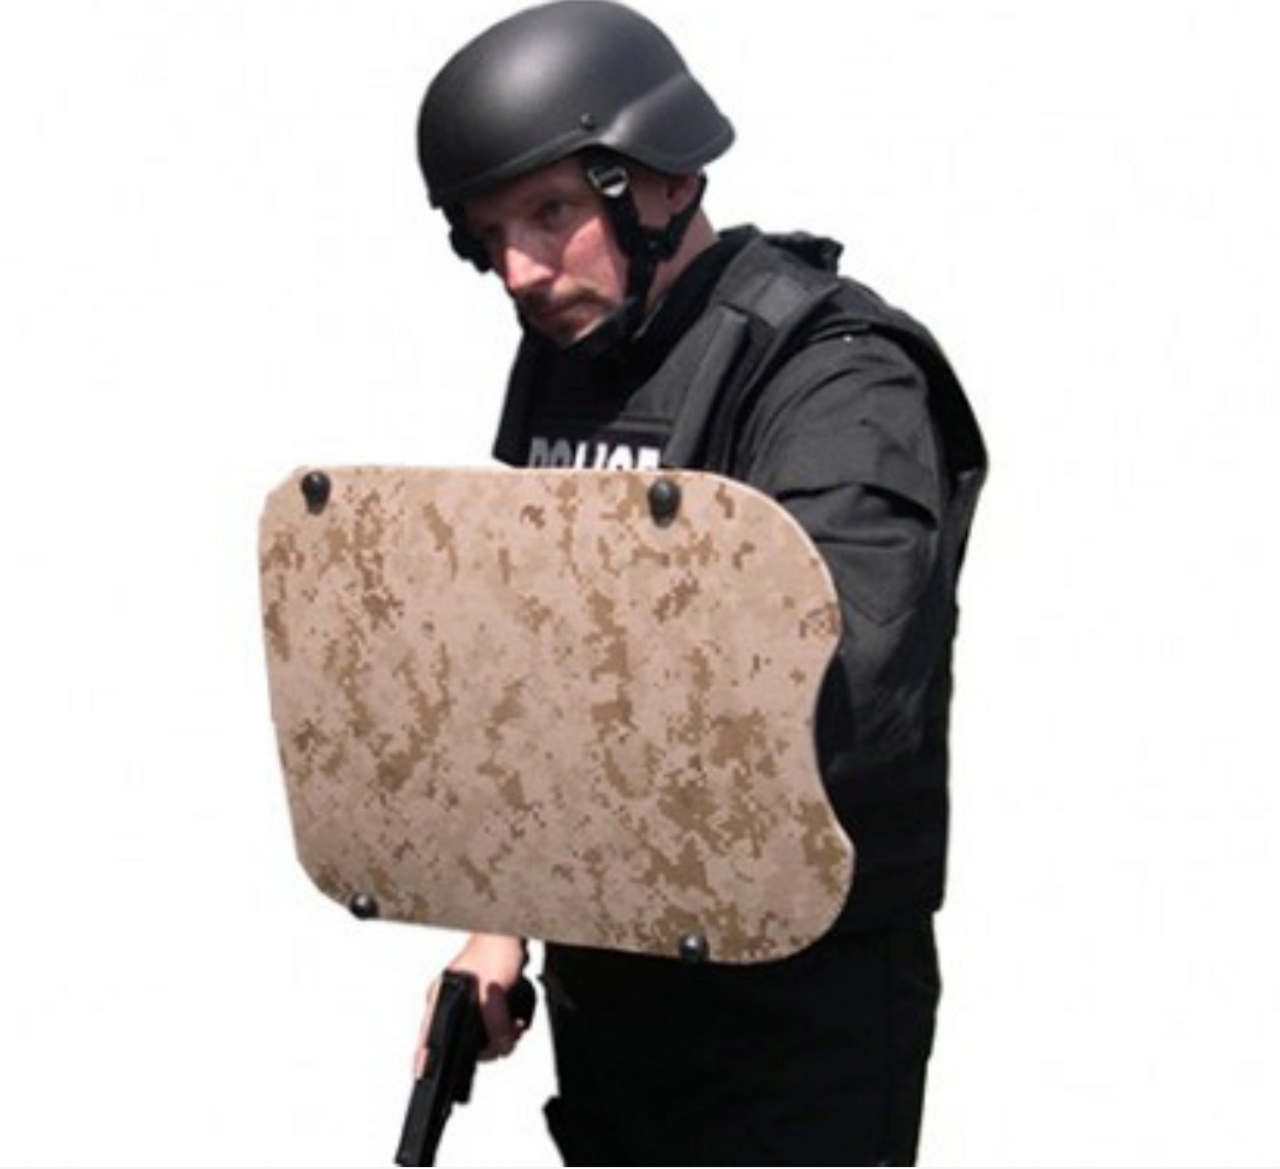 United Shield Police Tactical Shield, NIJ Level IIIA Protection, Integrated Mount, Ambidextrous & Collapsible Handles